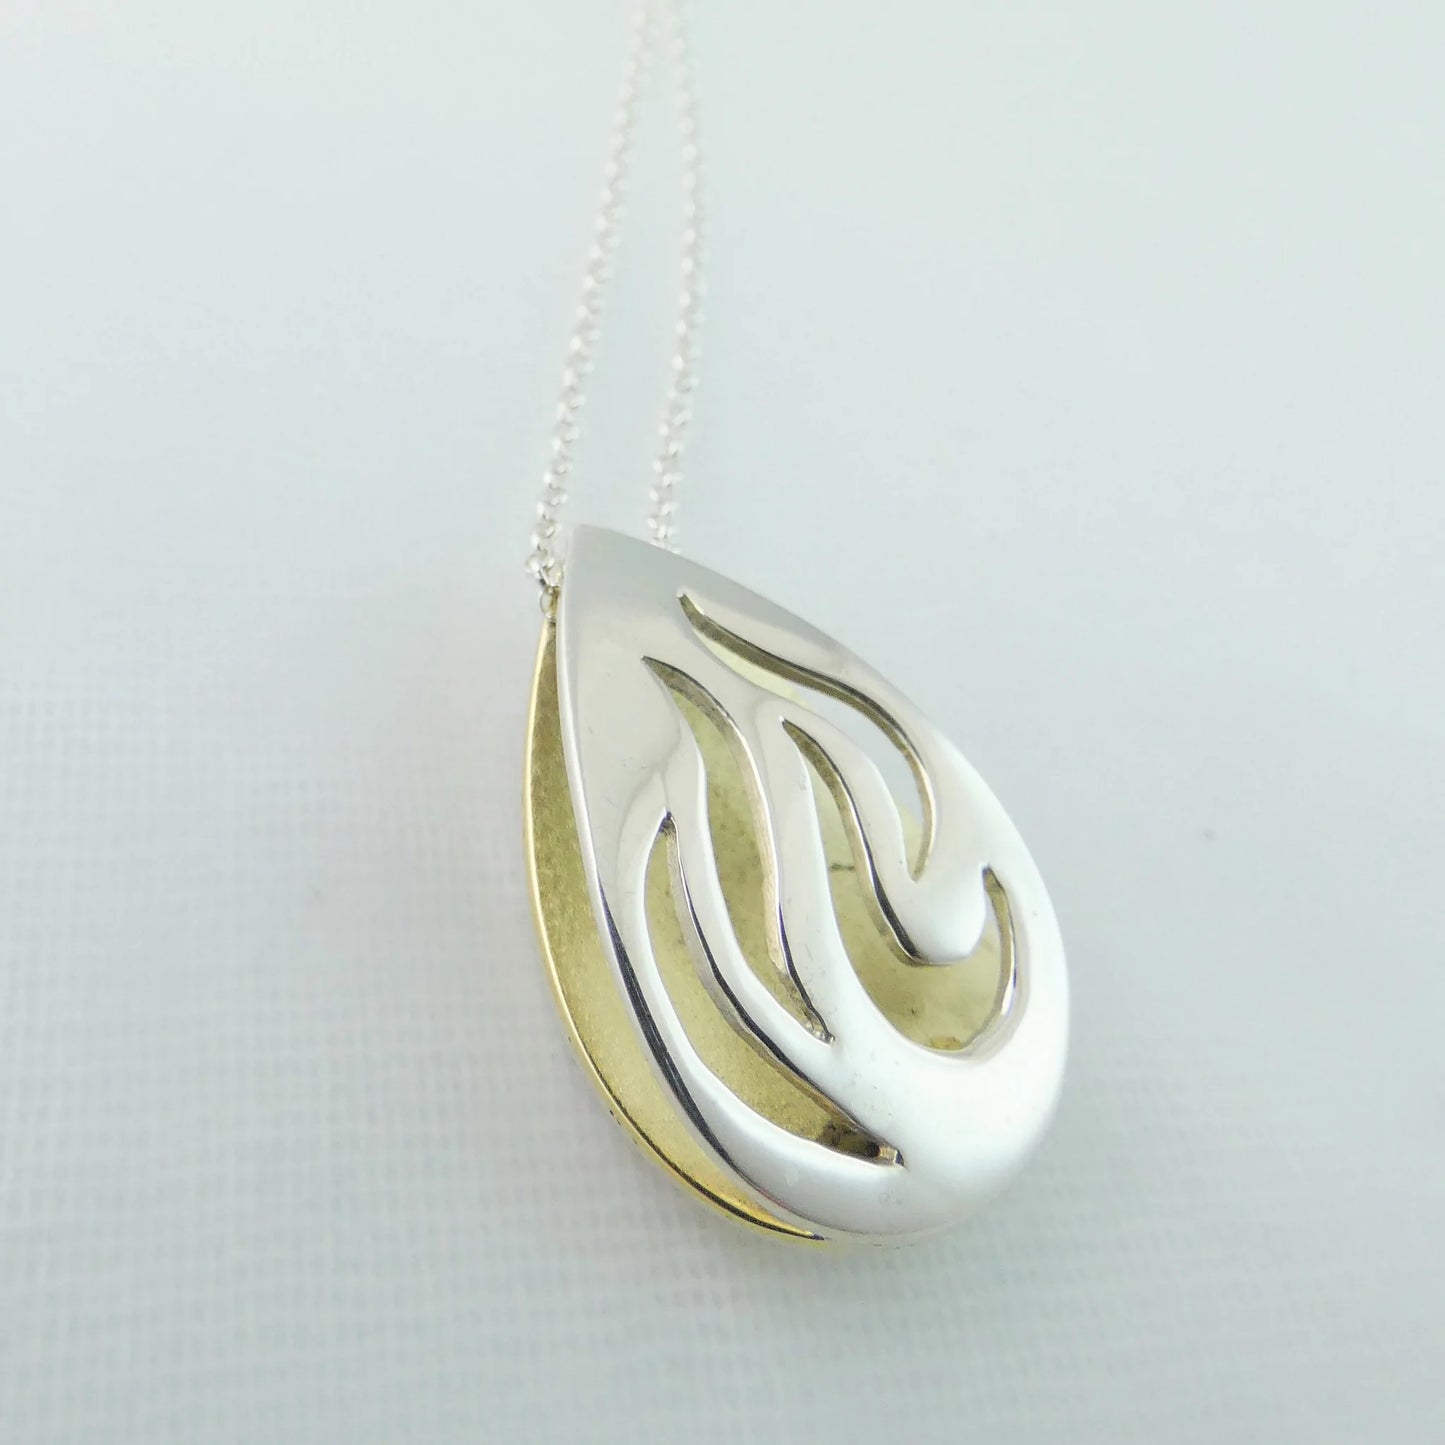  Bealtaine Pendant - shaped like the flames of fire - silver and brass - banshee silver 